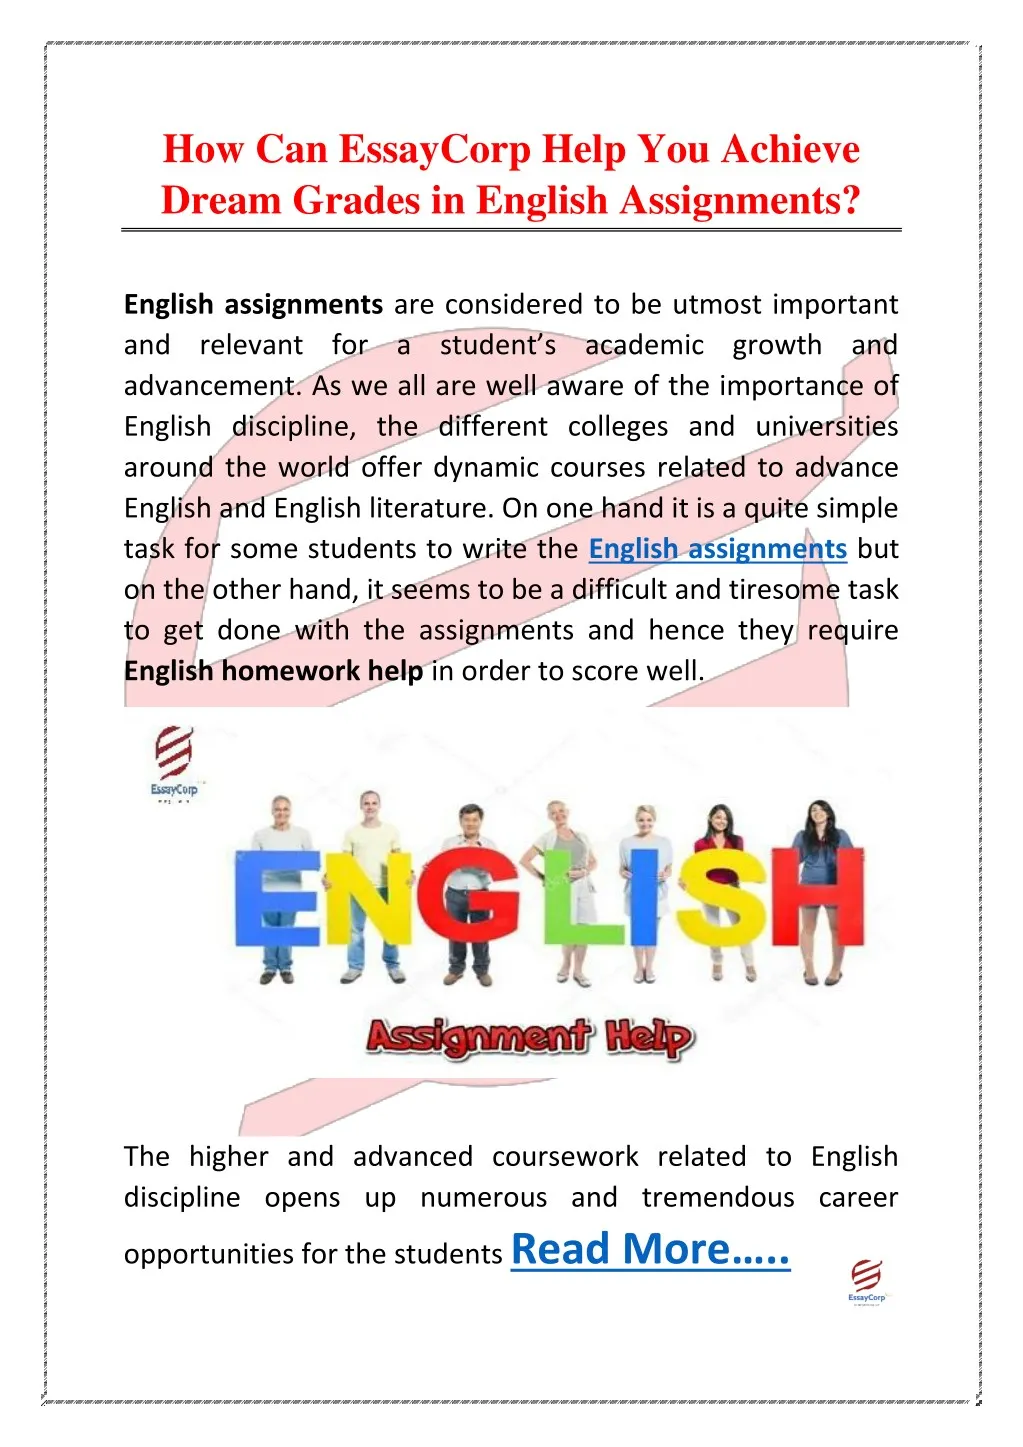 how can essaycorp help you achieve dream grades